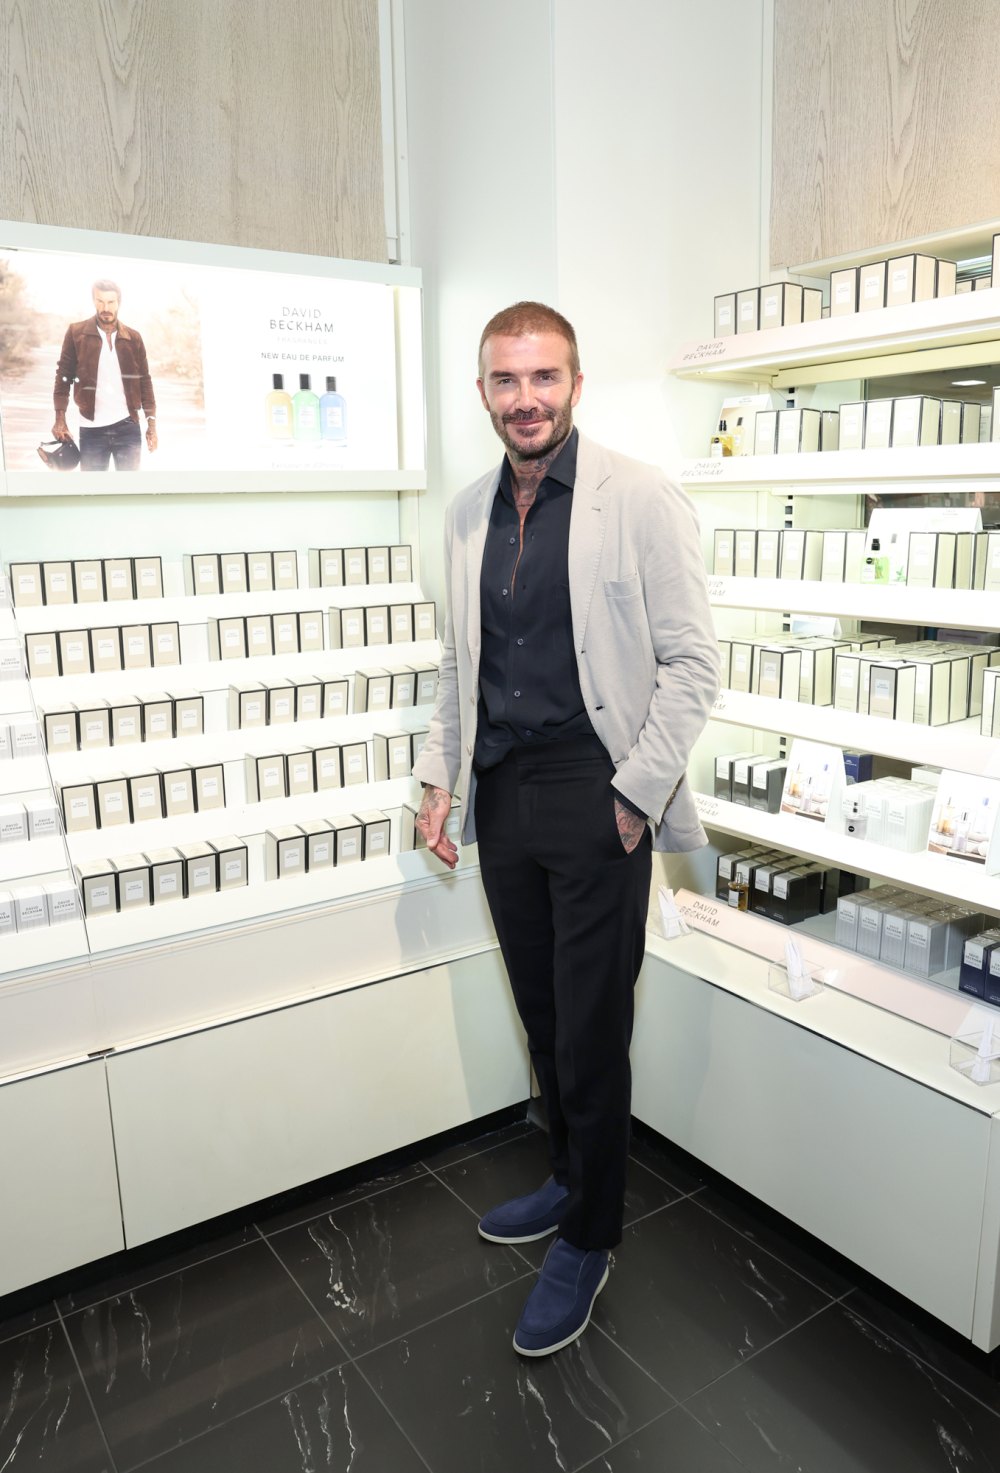 David Beckham Launches Fragment Collection With JC Penny